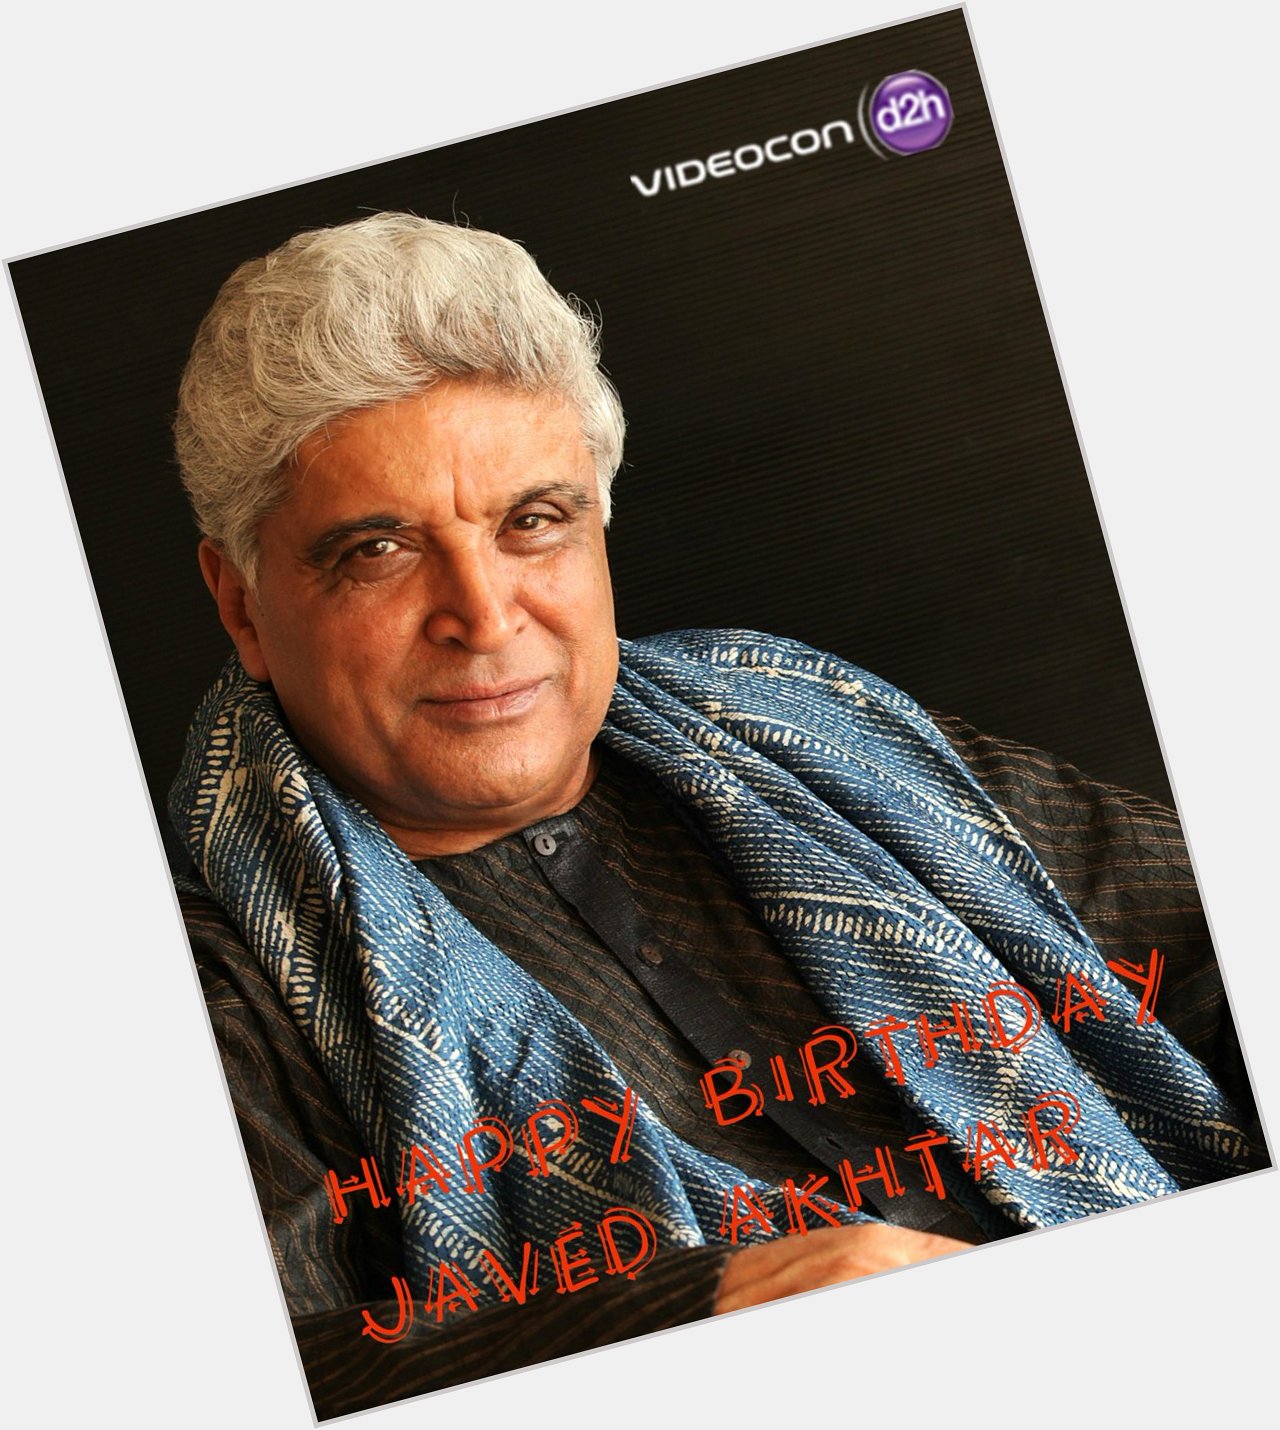 We wish Javed Akhtar a very Happy Birthday. Leave your birthday wishes for the veteran poet in your messages. 